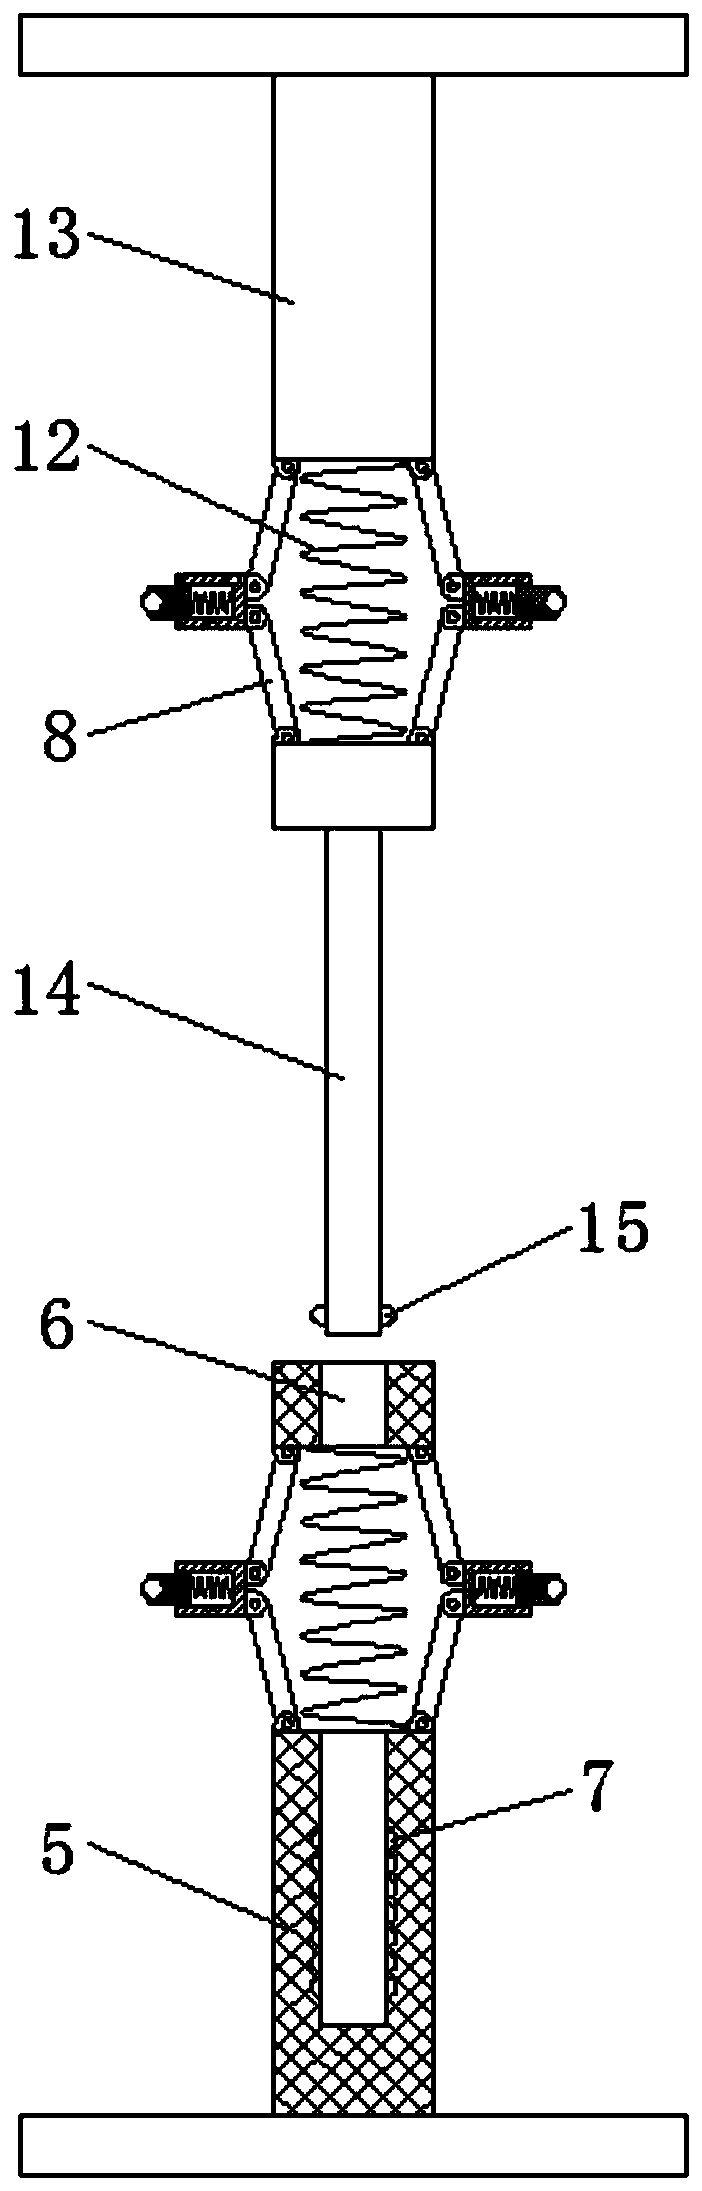 Textile bobbin placing device based on extrusion limit